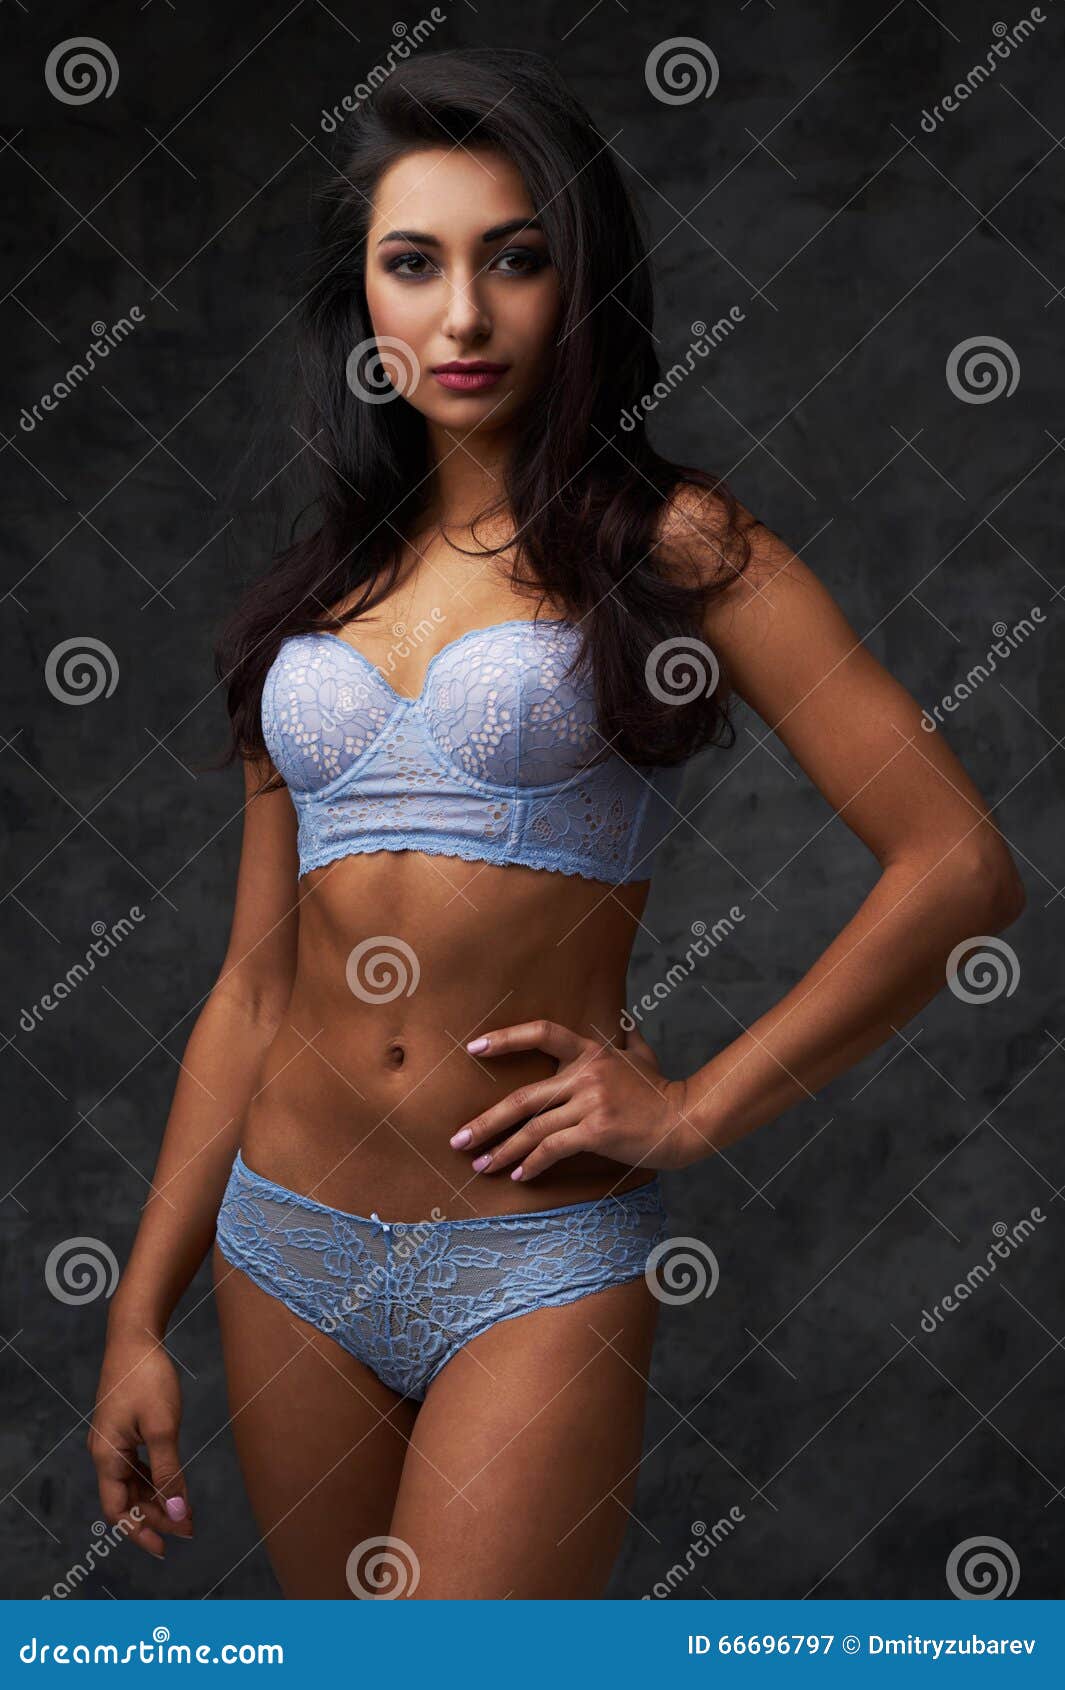 https://thumbs.dreamstime.com/z/beautiful-indian-lady-blue-lingerie-black-haired-woman-has-hairstyle-has-patterns-slim-fit-sexy-66696797.jpg